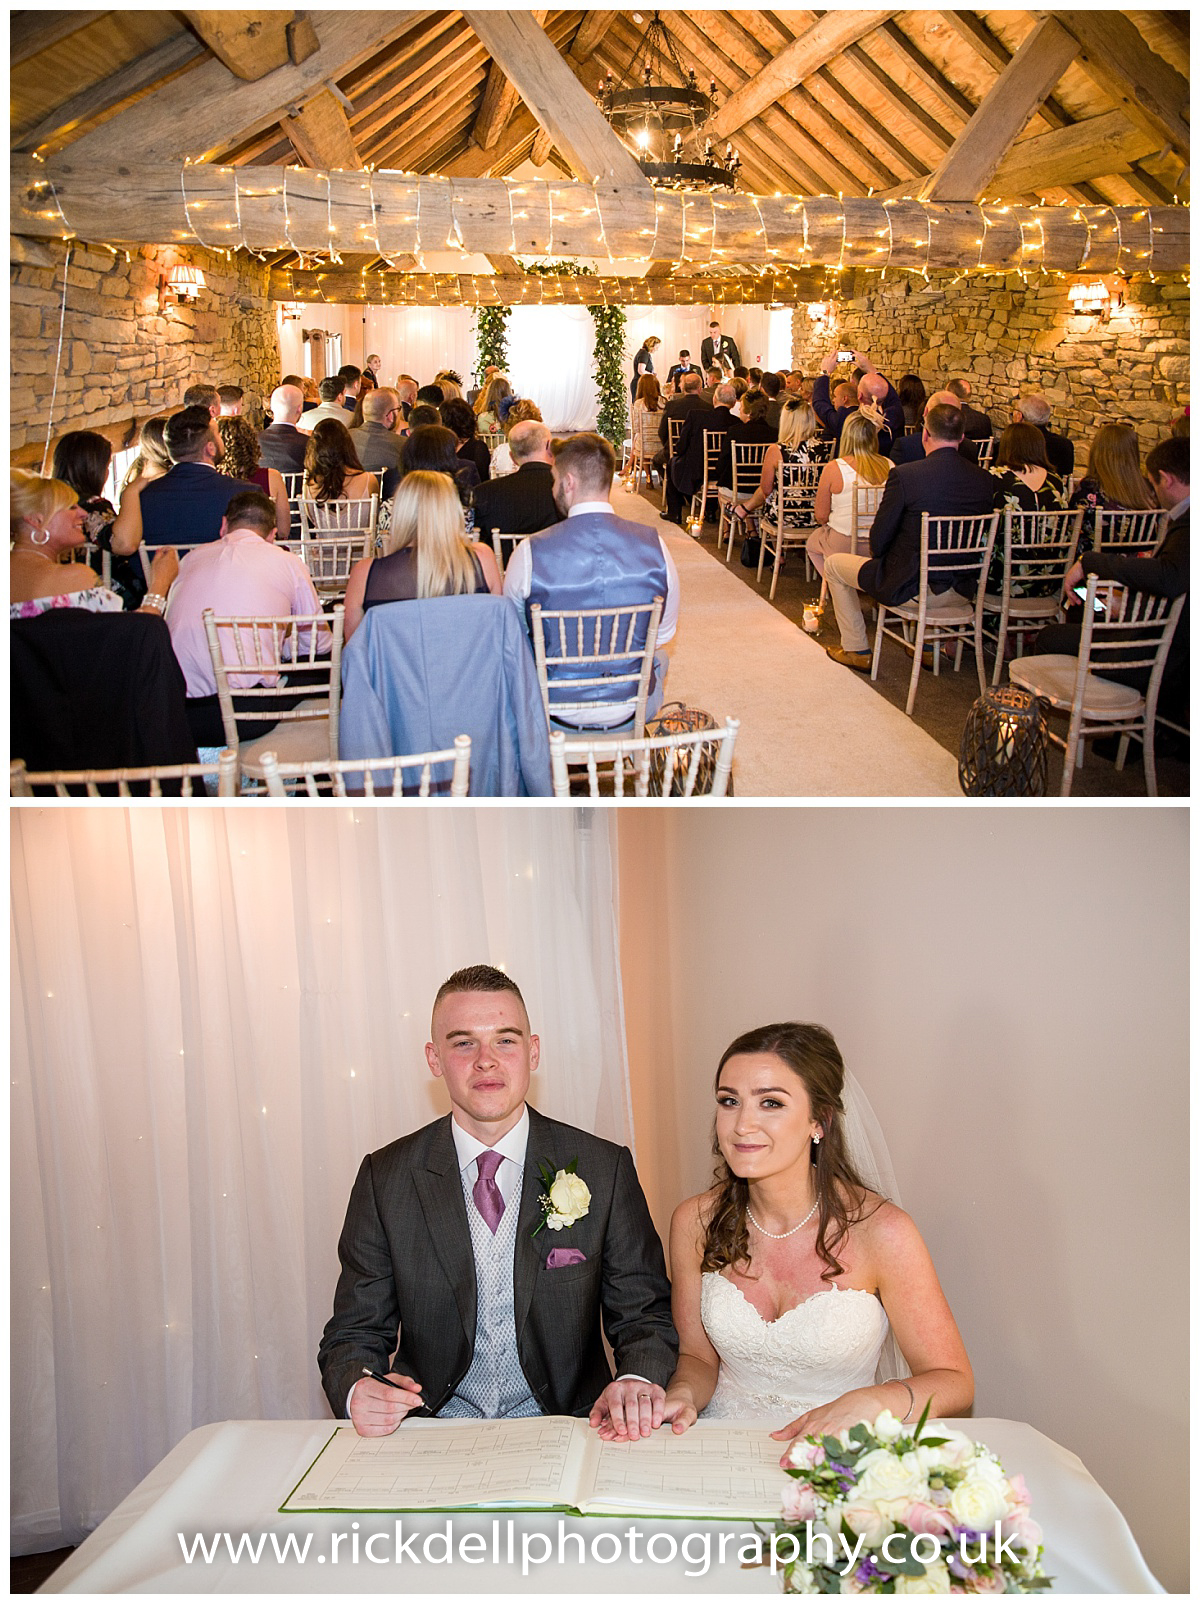 Wedding Photography Manchester - Tamsyn and Jamie's Hyde Bank Farm Wedding Day 39